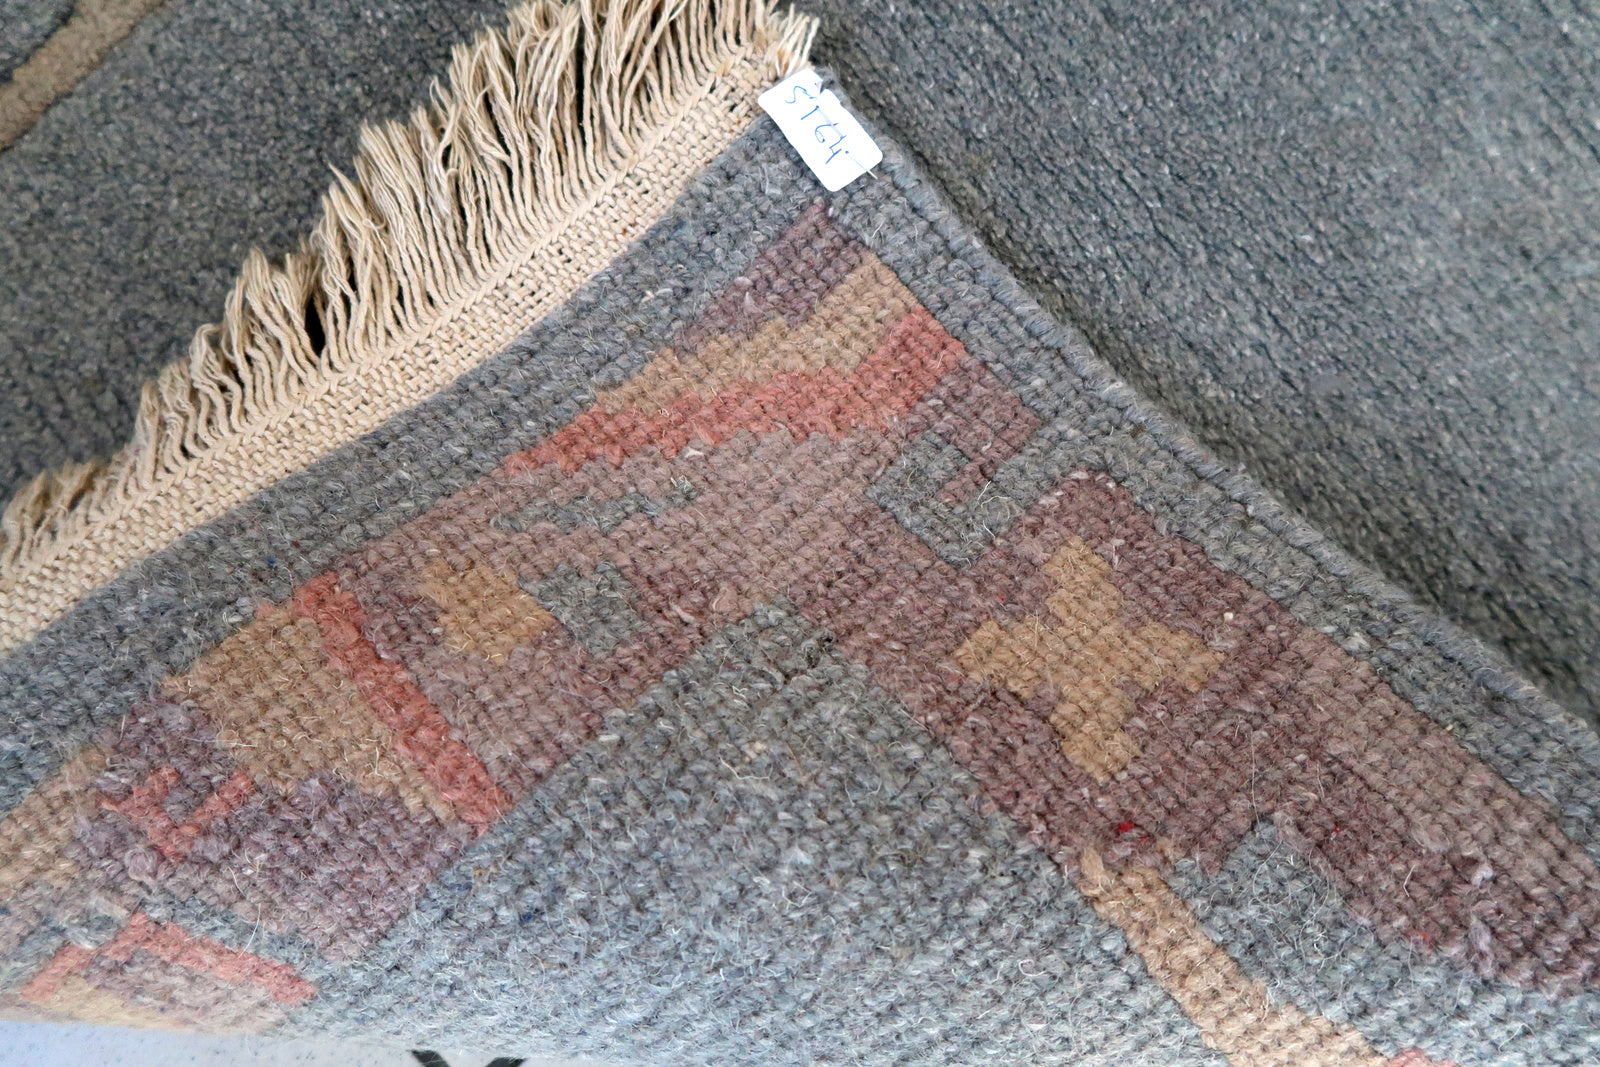 Handmade vintage Tibetan Khaden rug in original good condition. The rug has been made in Nepal, it is from circa1970s.